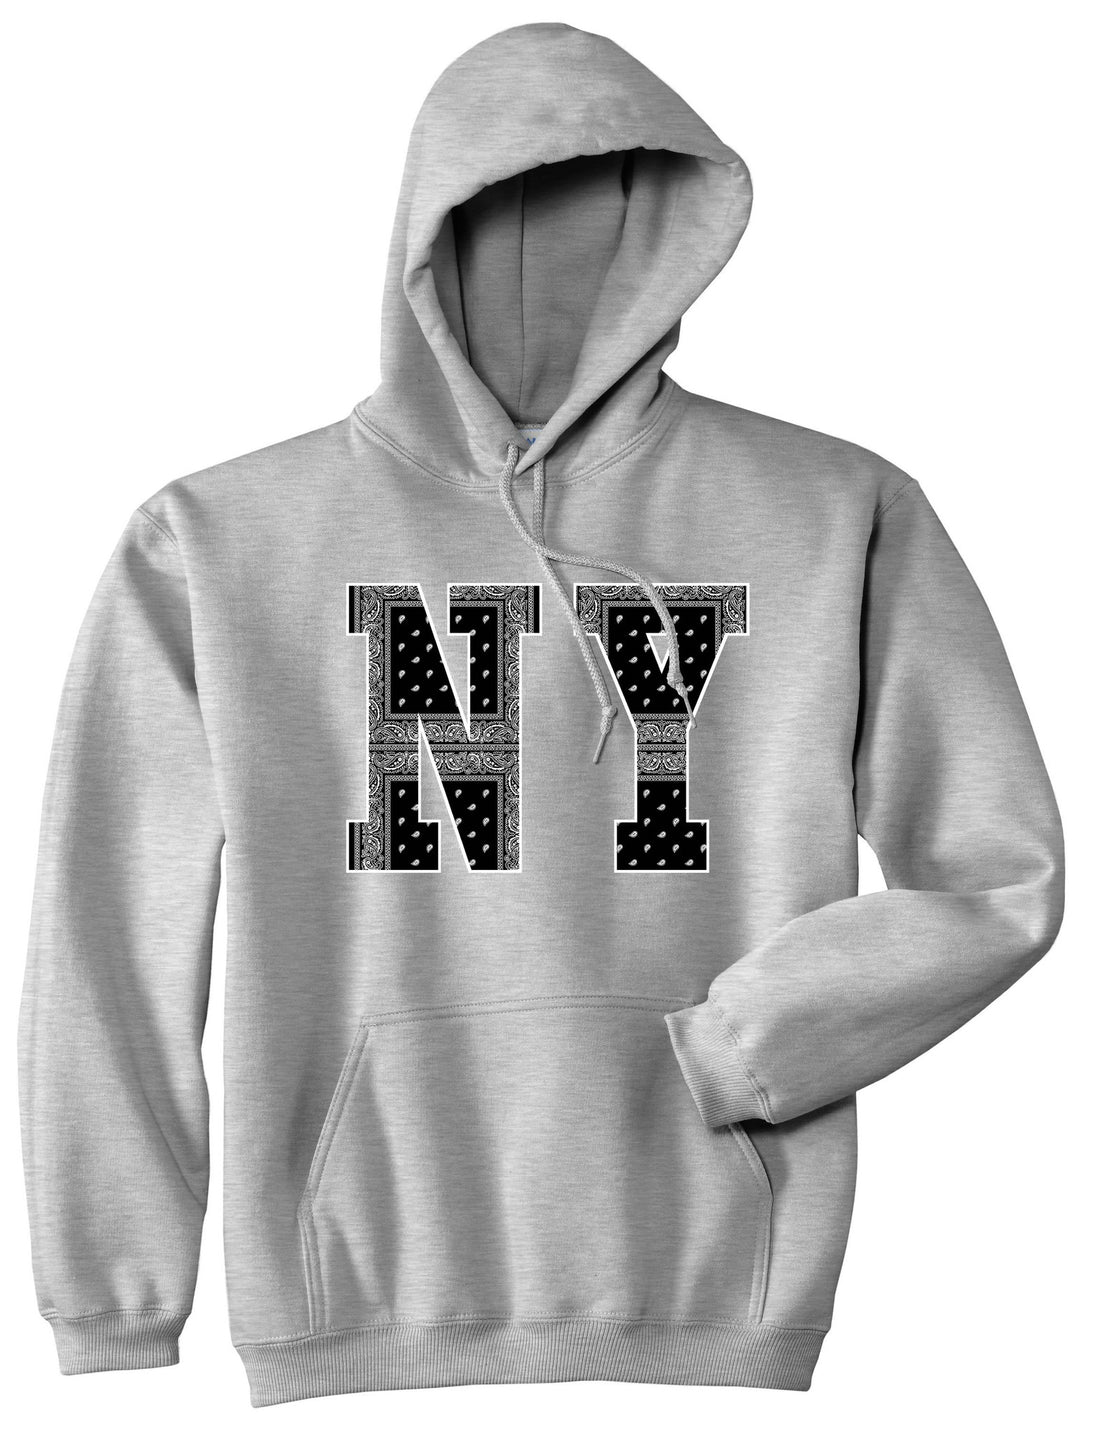 New York Bandana NYC Black by Kings Of NY Gang Flag Pullover Hoodie Hoody In Grey by Kings Of NY